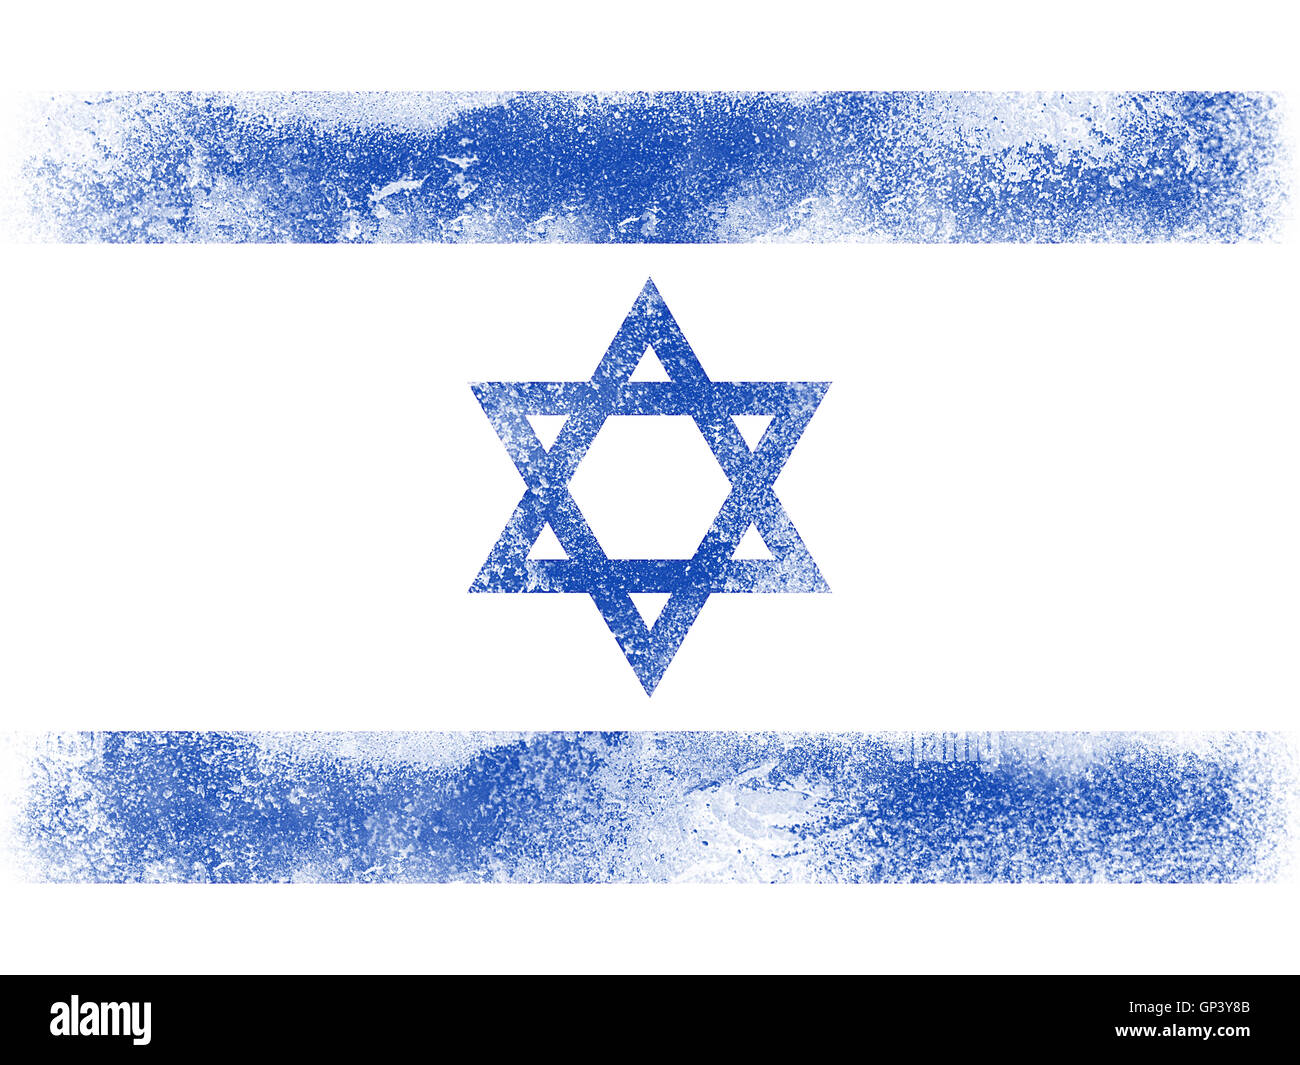 Powder paint exploding in colors of Israel flag isolated on white background. Abstract particles explosion of colorful dust. Stock Photo